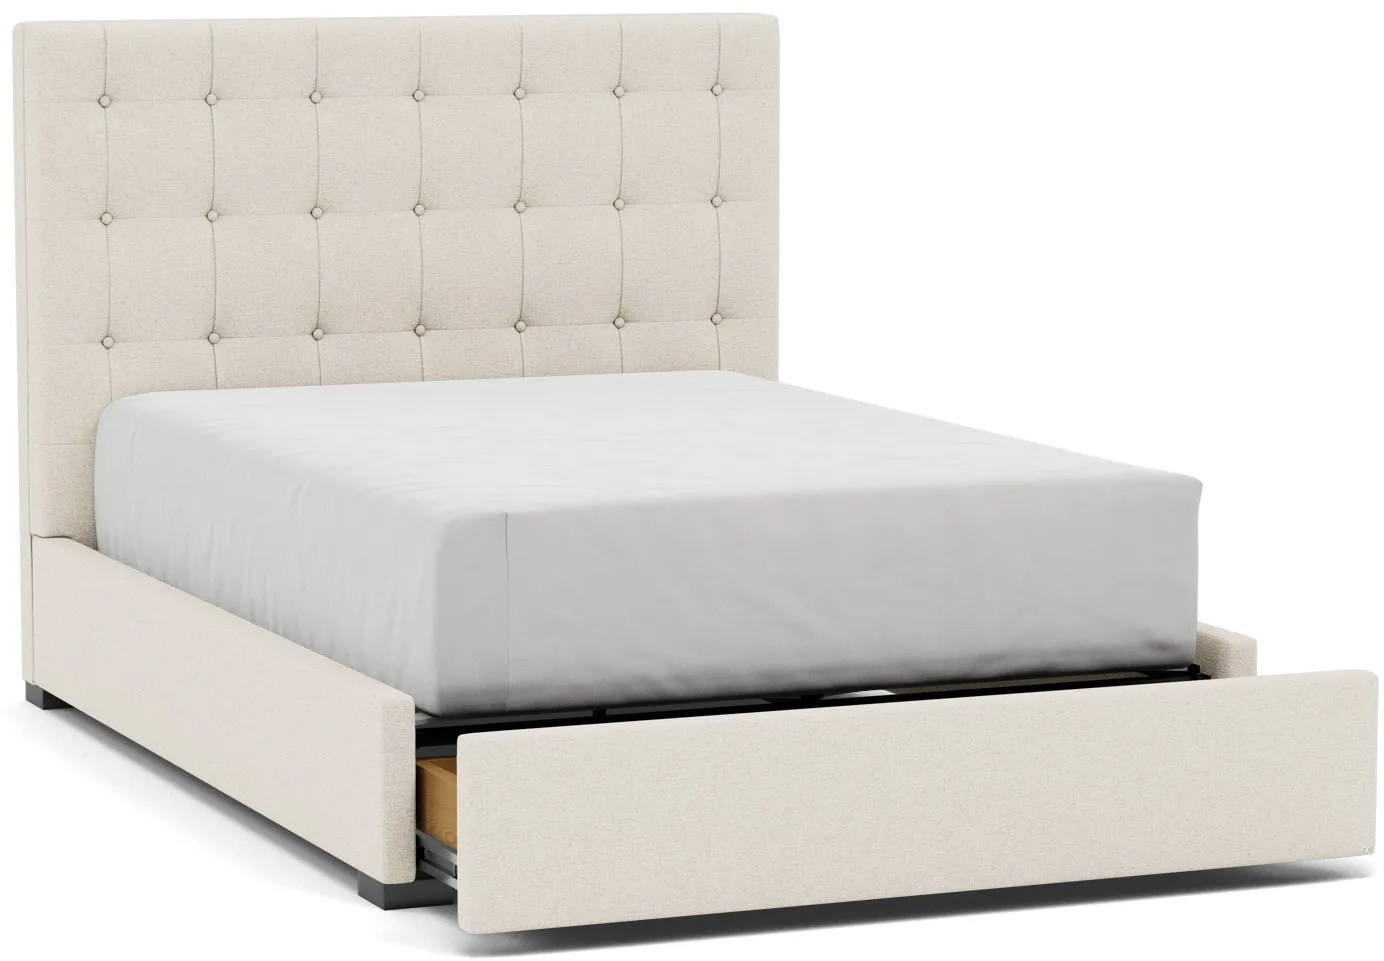 Abby Queen Upholstered Storage Bed in Merit Pearl